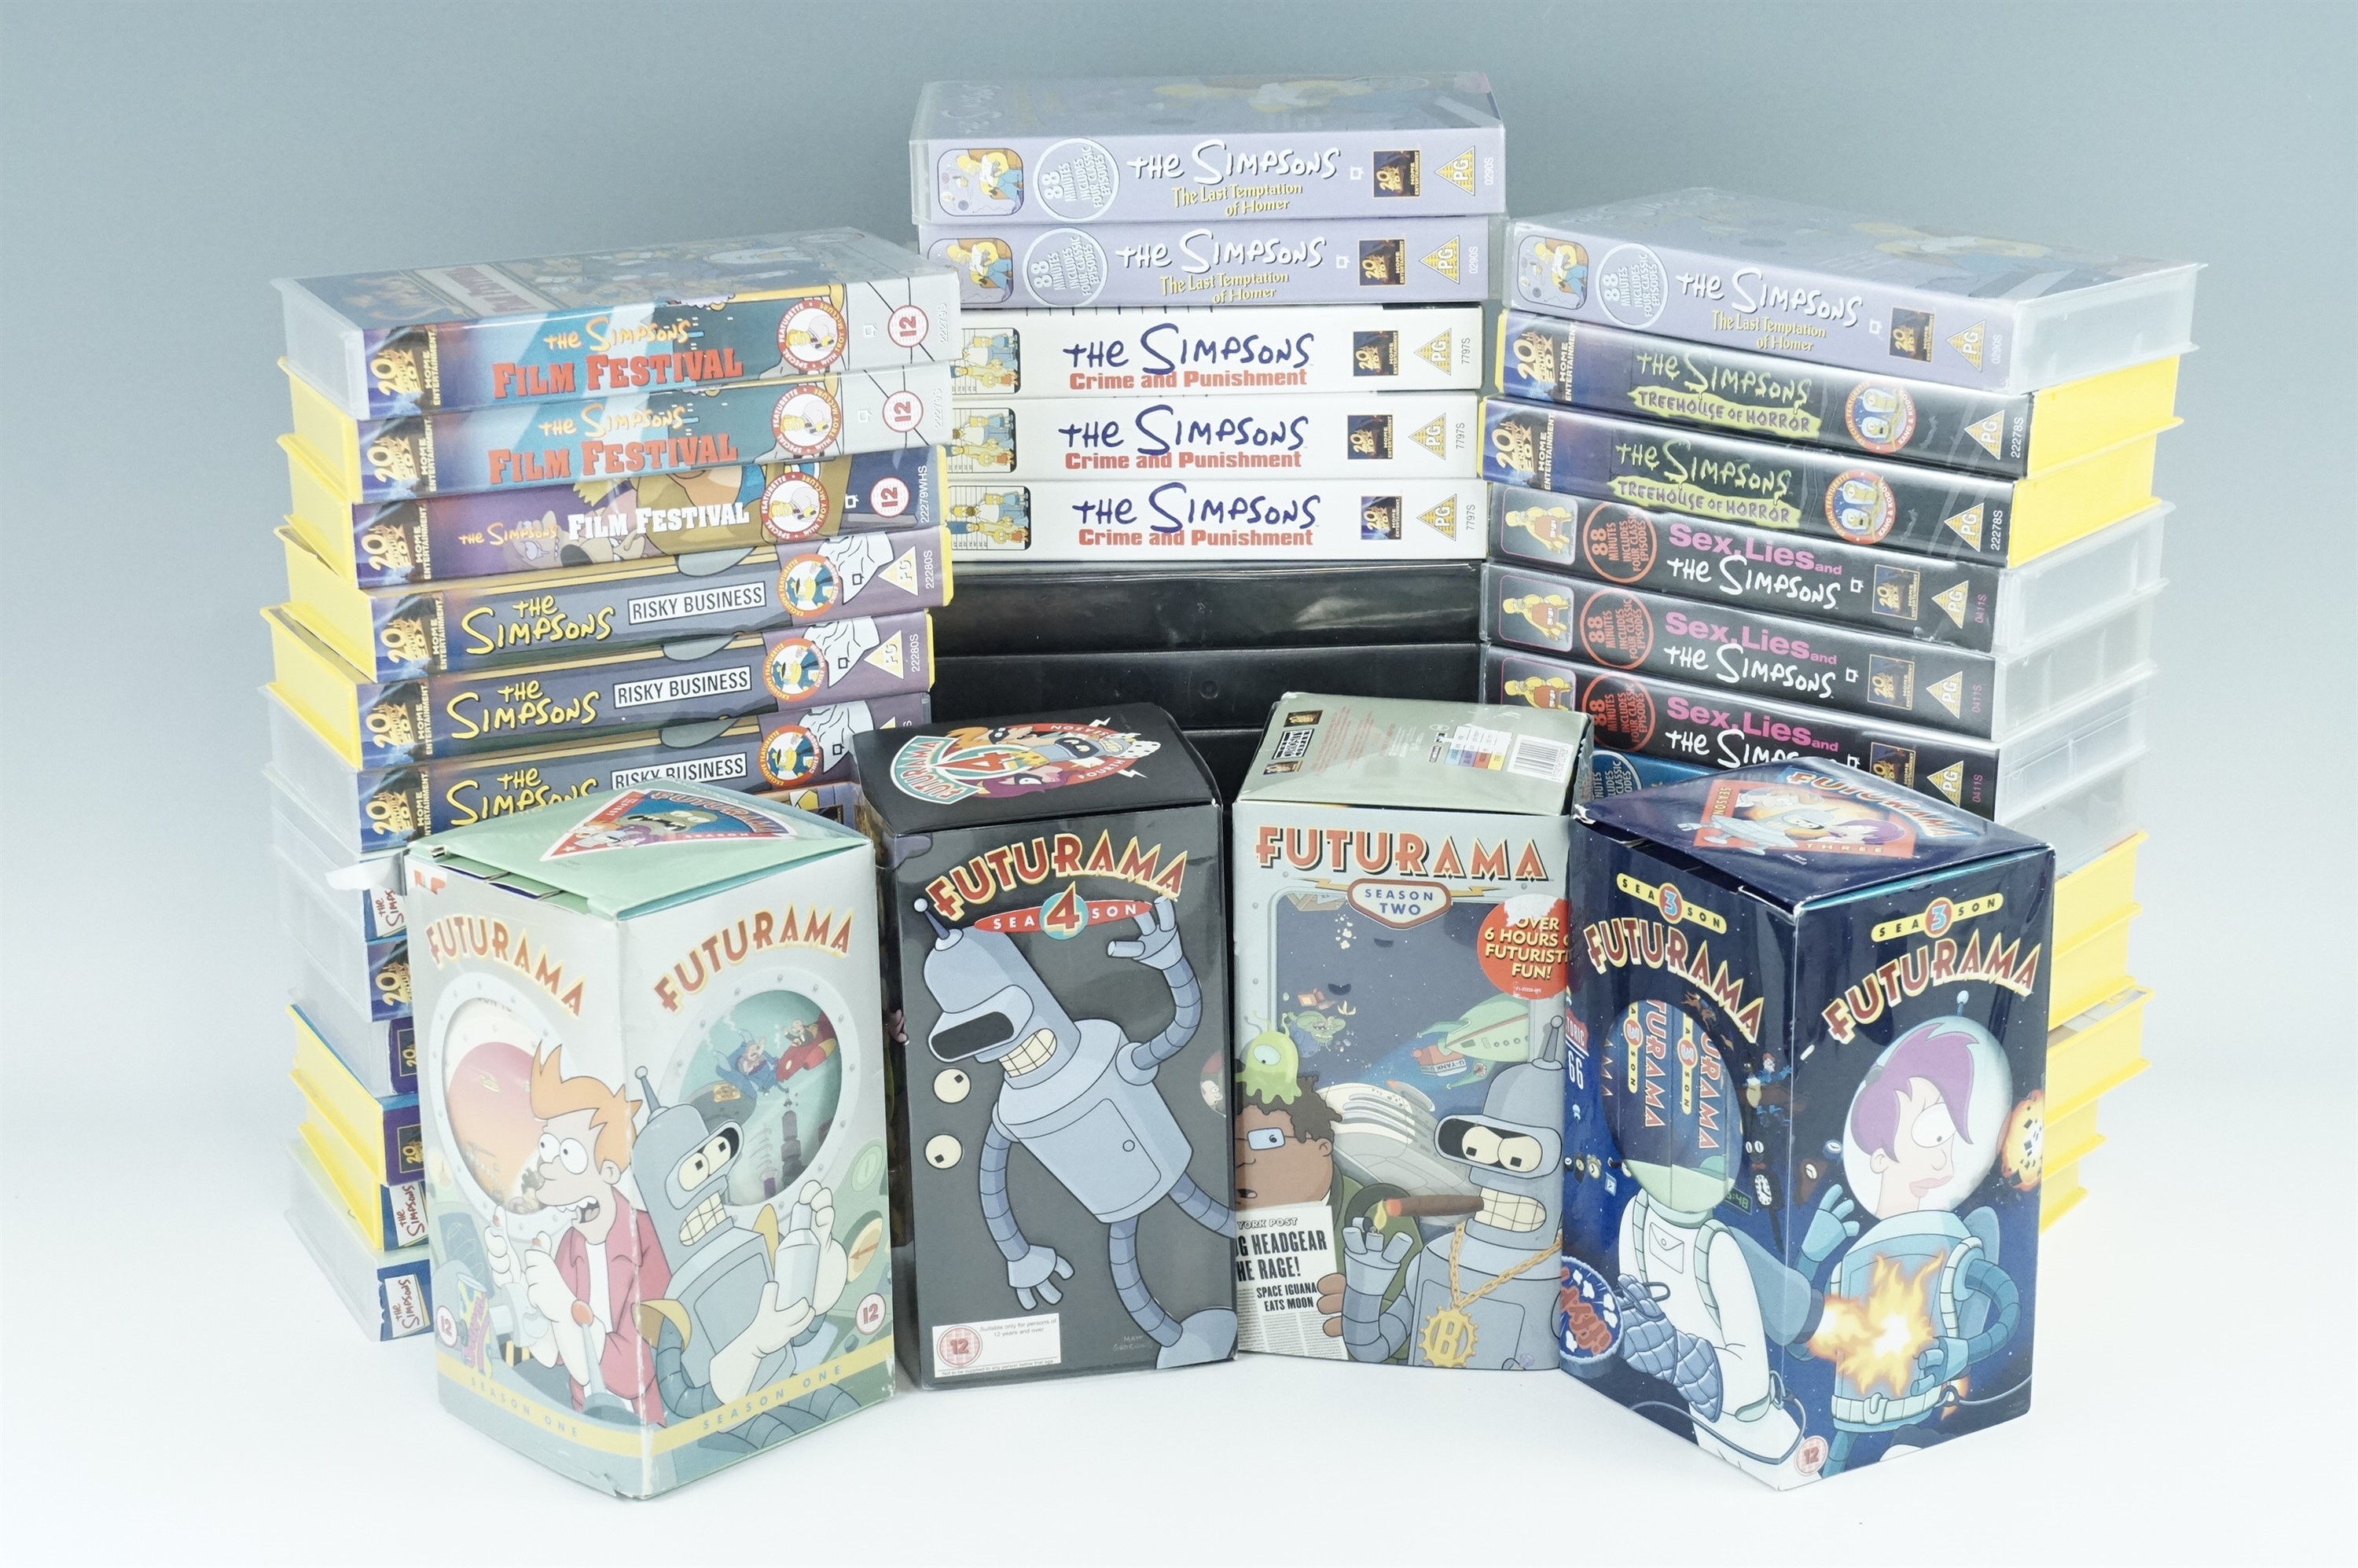 A large quantity of The Simpsons and Futurama VHS videos